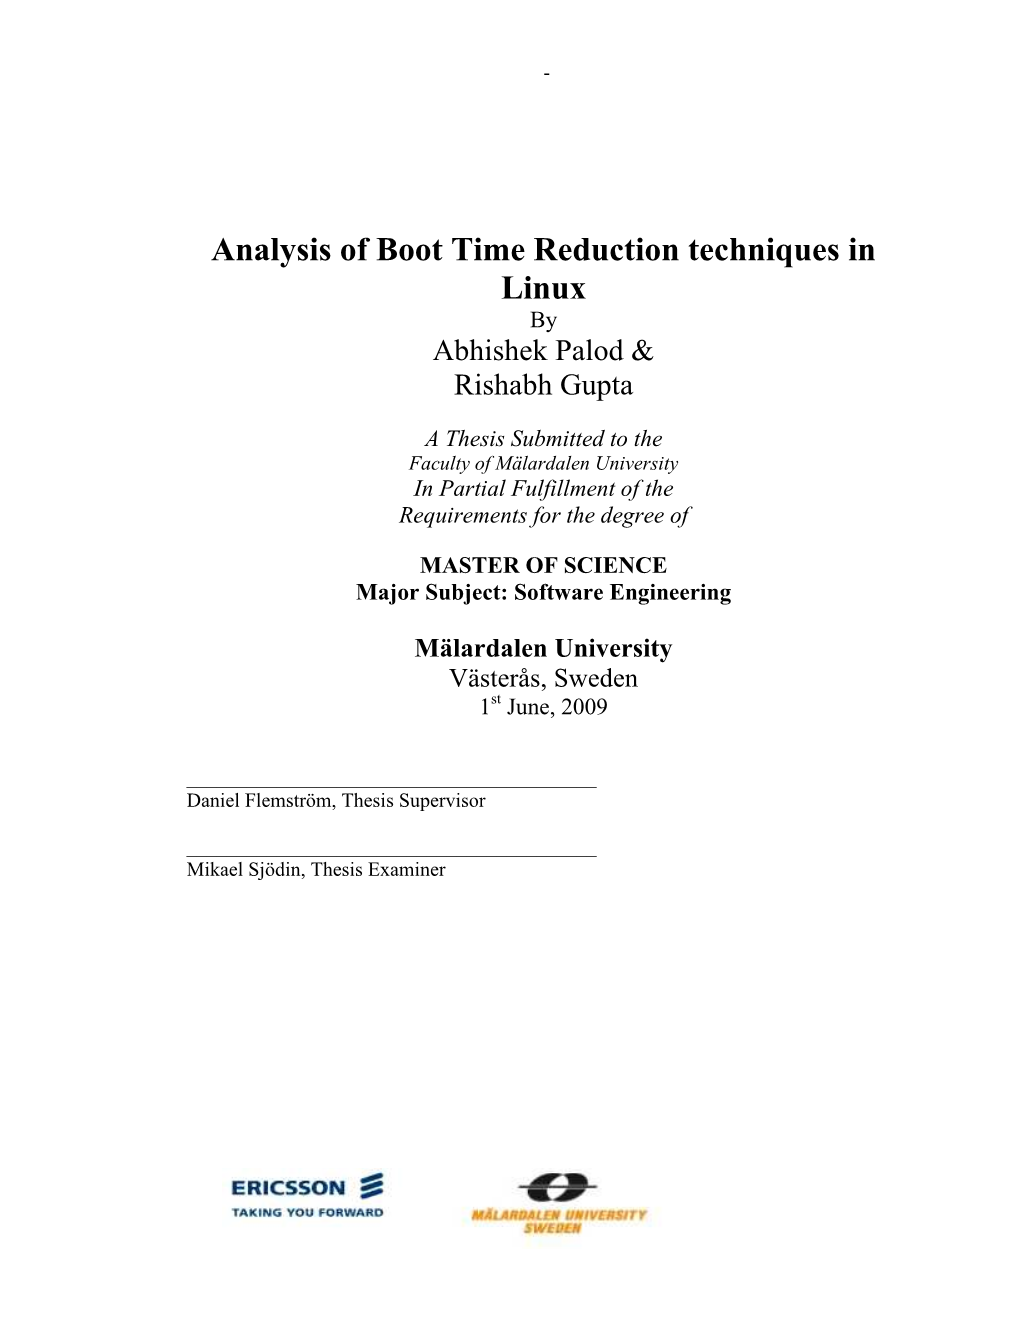 Analysis of Boot Time Reduction Techniques in Linux by Abhishek Palod & Rishabh Gupta